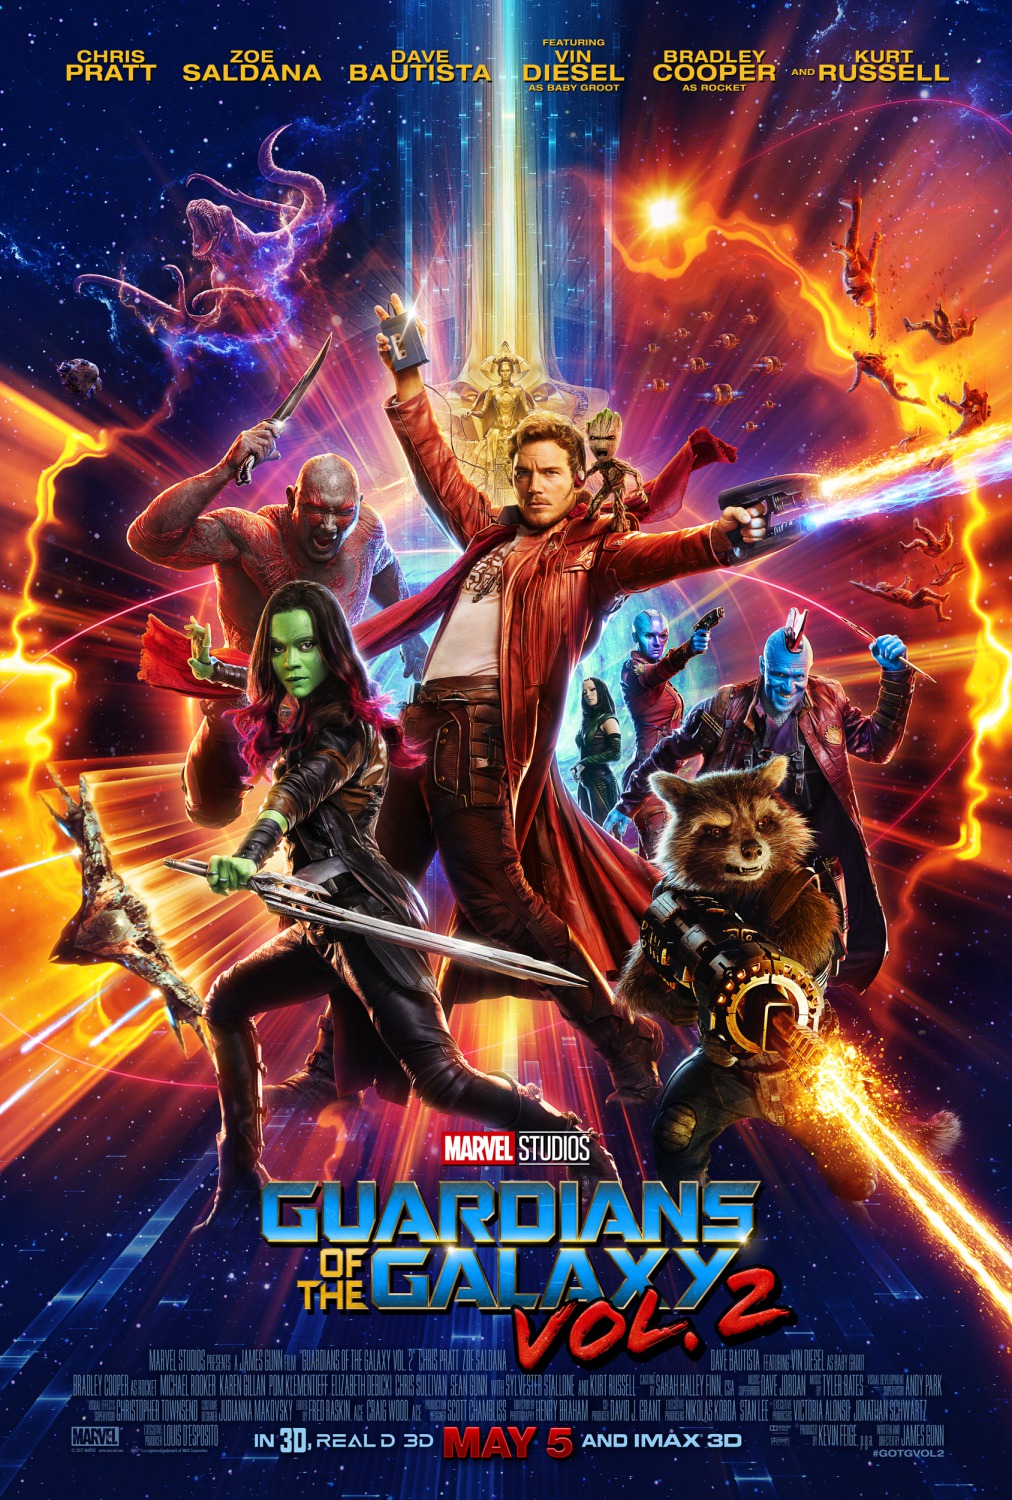 Poster for Guardians of the Galaxy Vol. 2 featuring Gamora, Star Lord, Drax, Rocket Racoon, Baby Groot, Yondu, and Nebula.